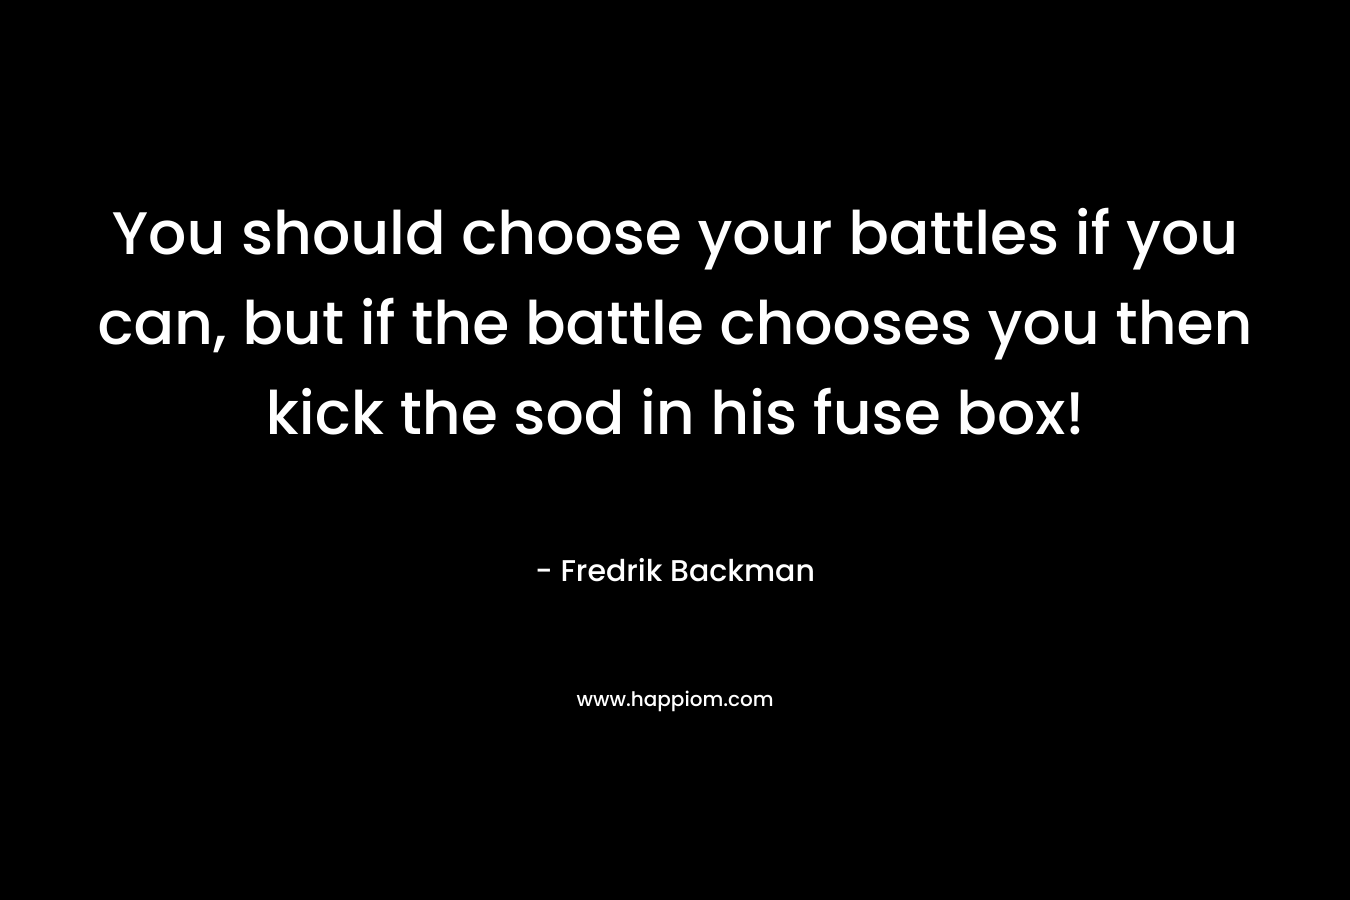 You should choose your battles if you can, but if the battle chooses you then kick the sod in his fuse box! – Fredrik Backman